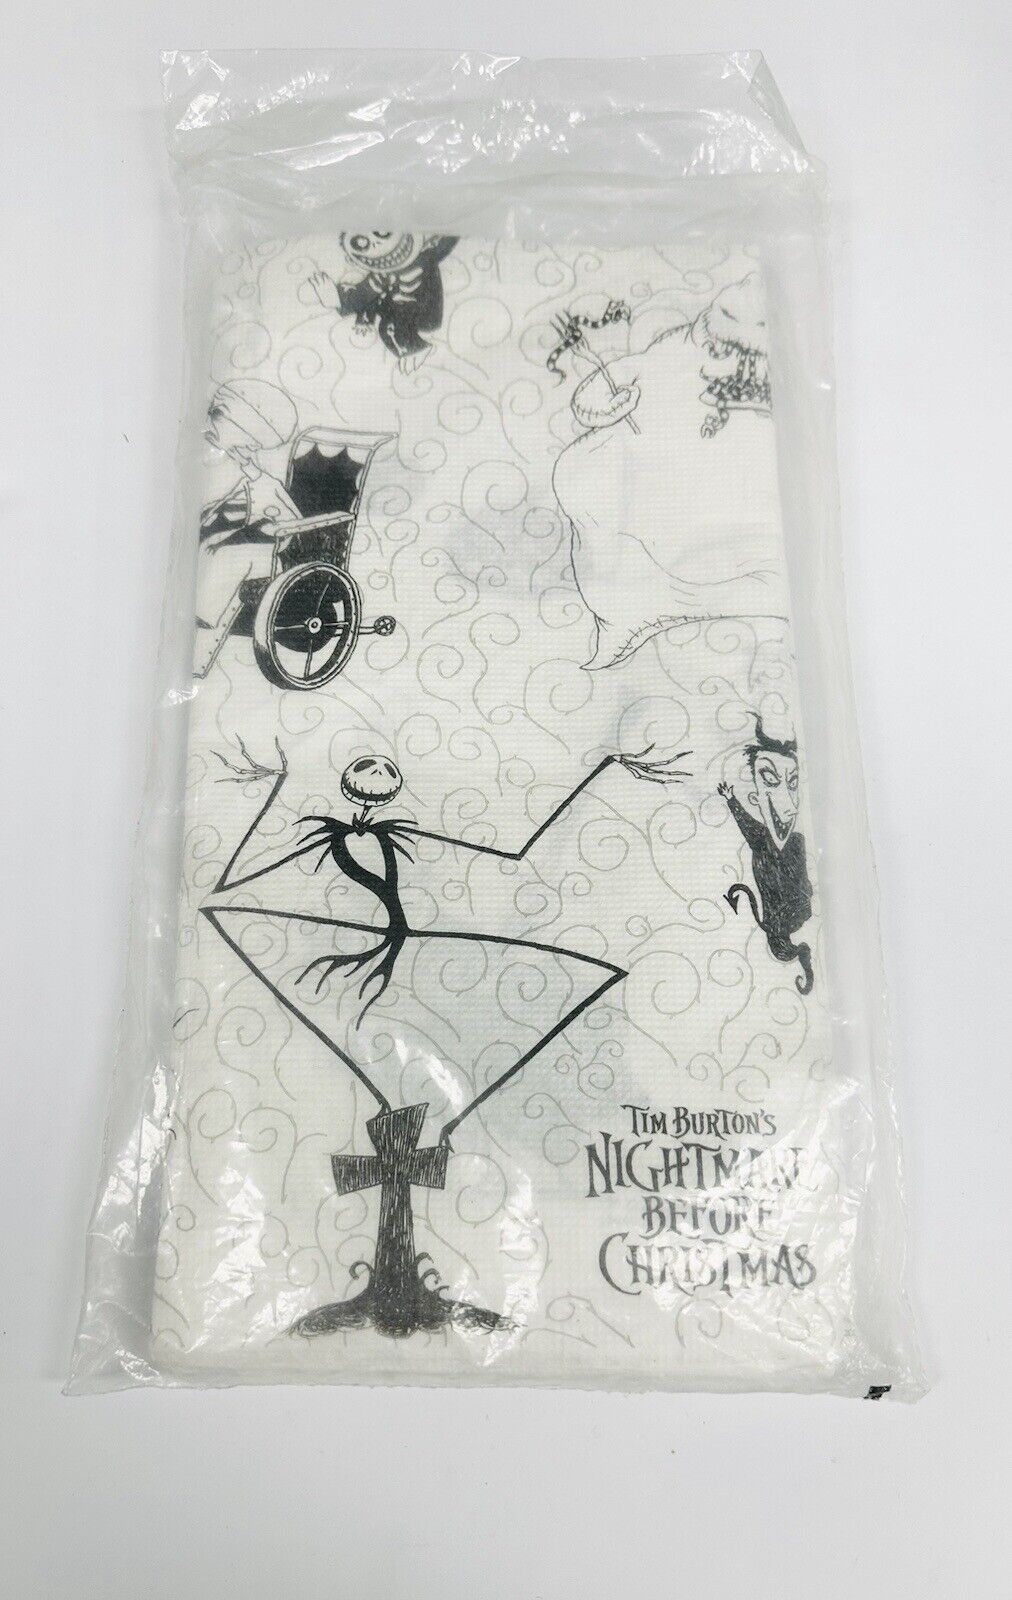 Nightmare Before Christmas Party Items Coasters, Napkins, Blowouts, Cloth Toy